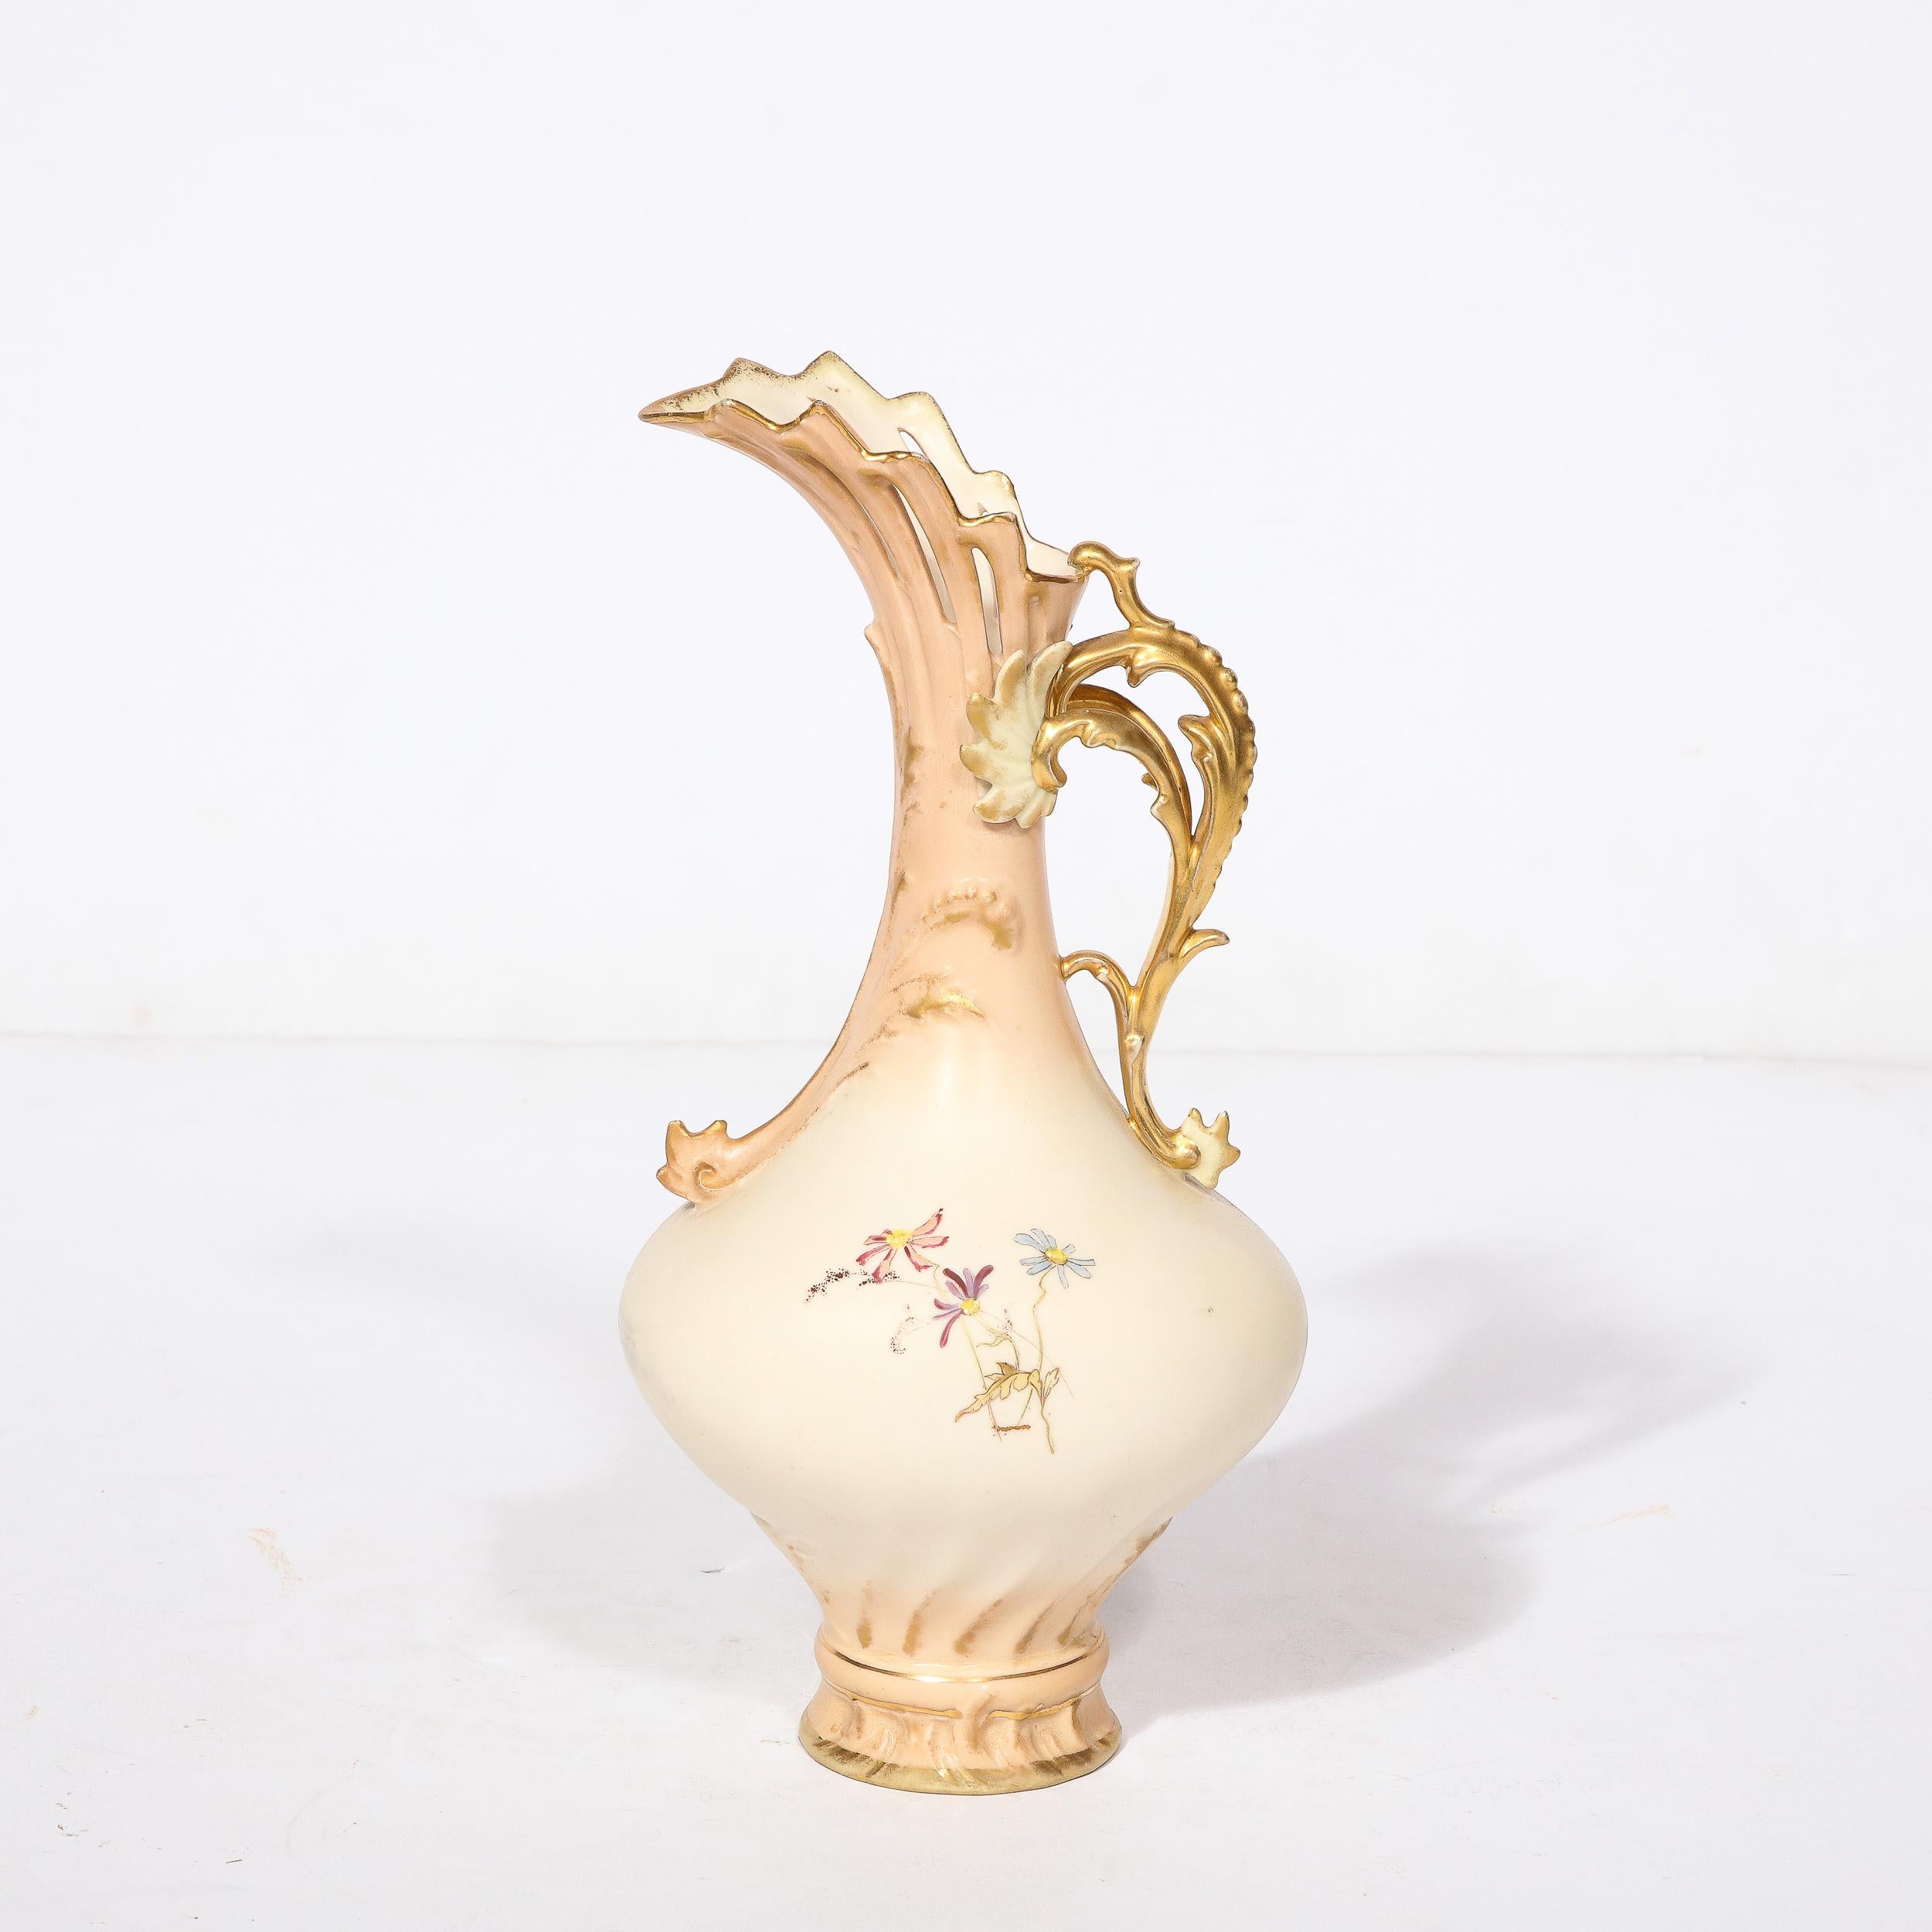 This elegant and well adorned Porcelain Vase signed A. Stowell Boston originates from Austria, Circa 1880. Featuring a rounded body with a lovely gilded stylized scroll form handle and fluted mouth, this piece is simultaneously bold and delicate.